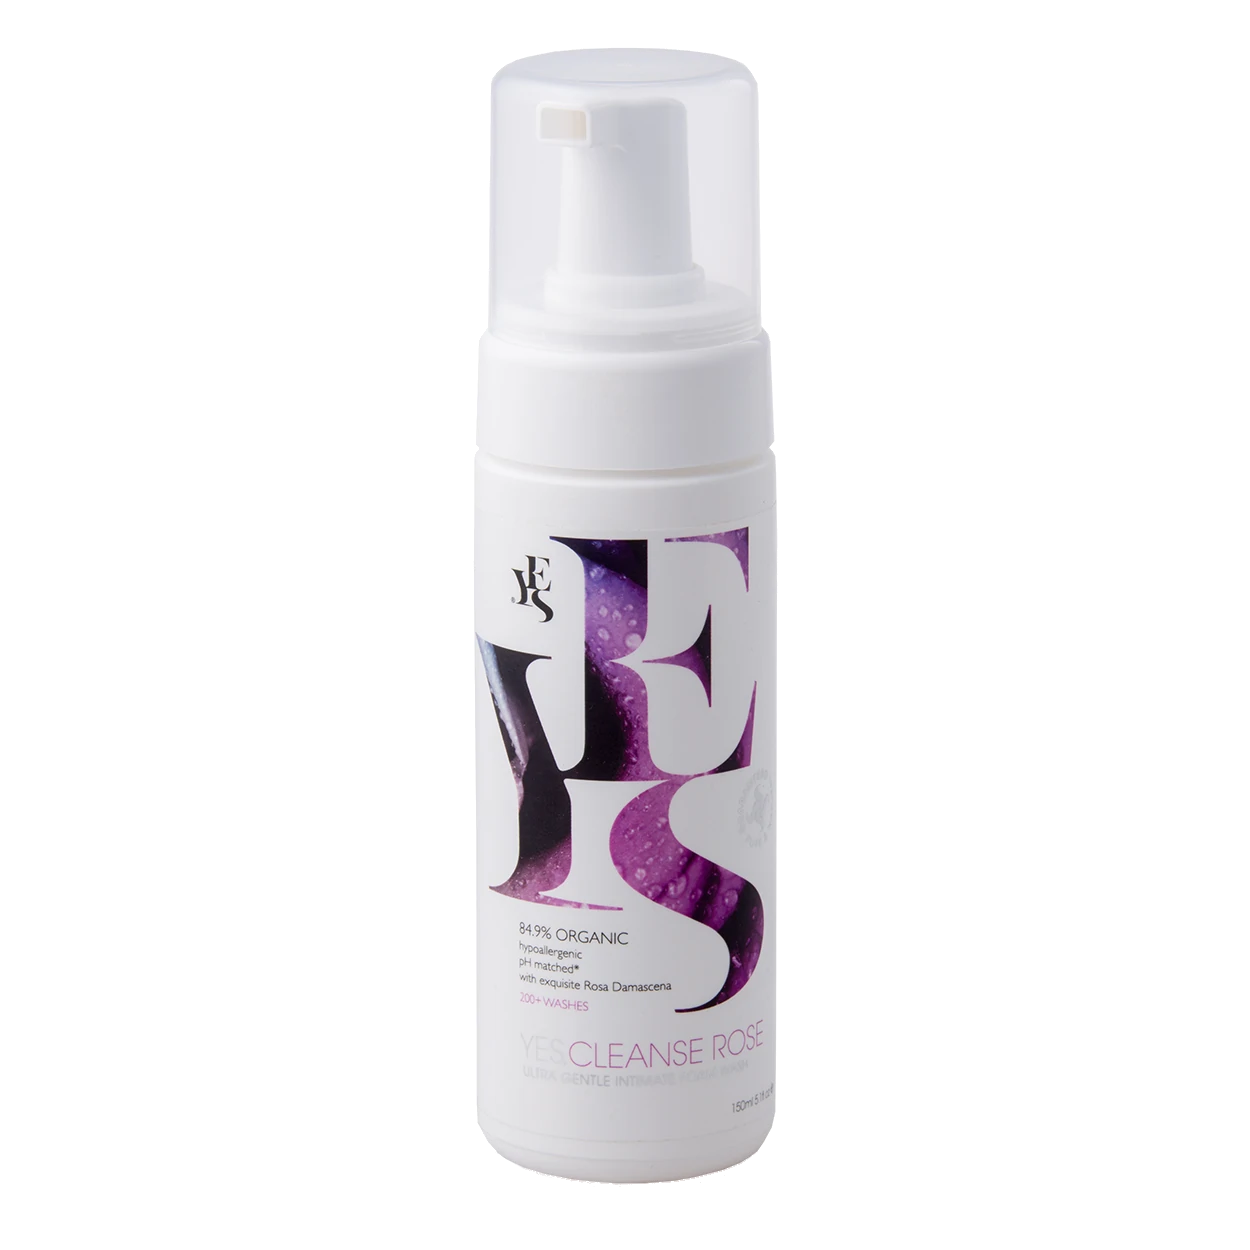 YES® CLEANSE - Intimate Wash